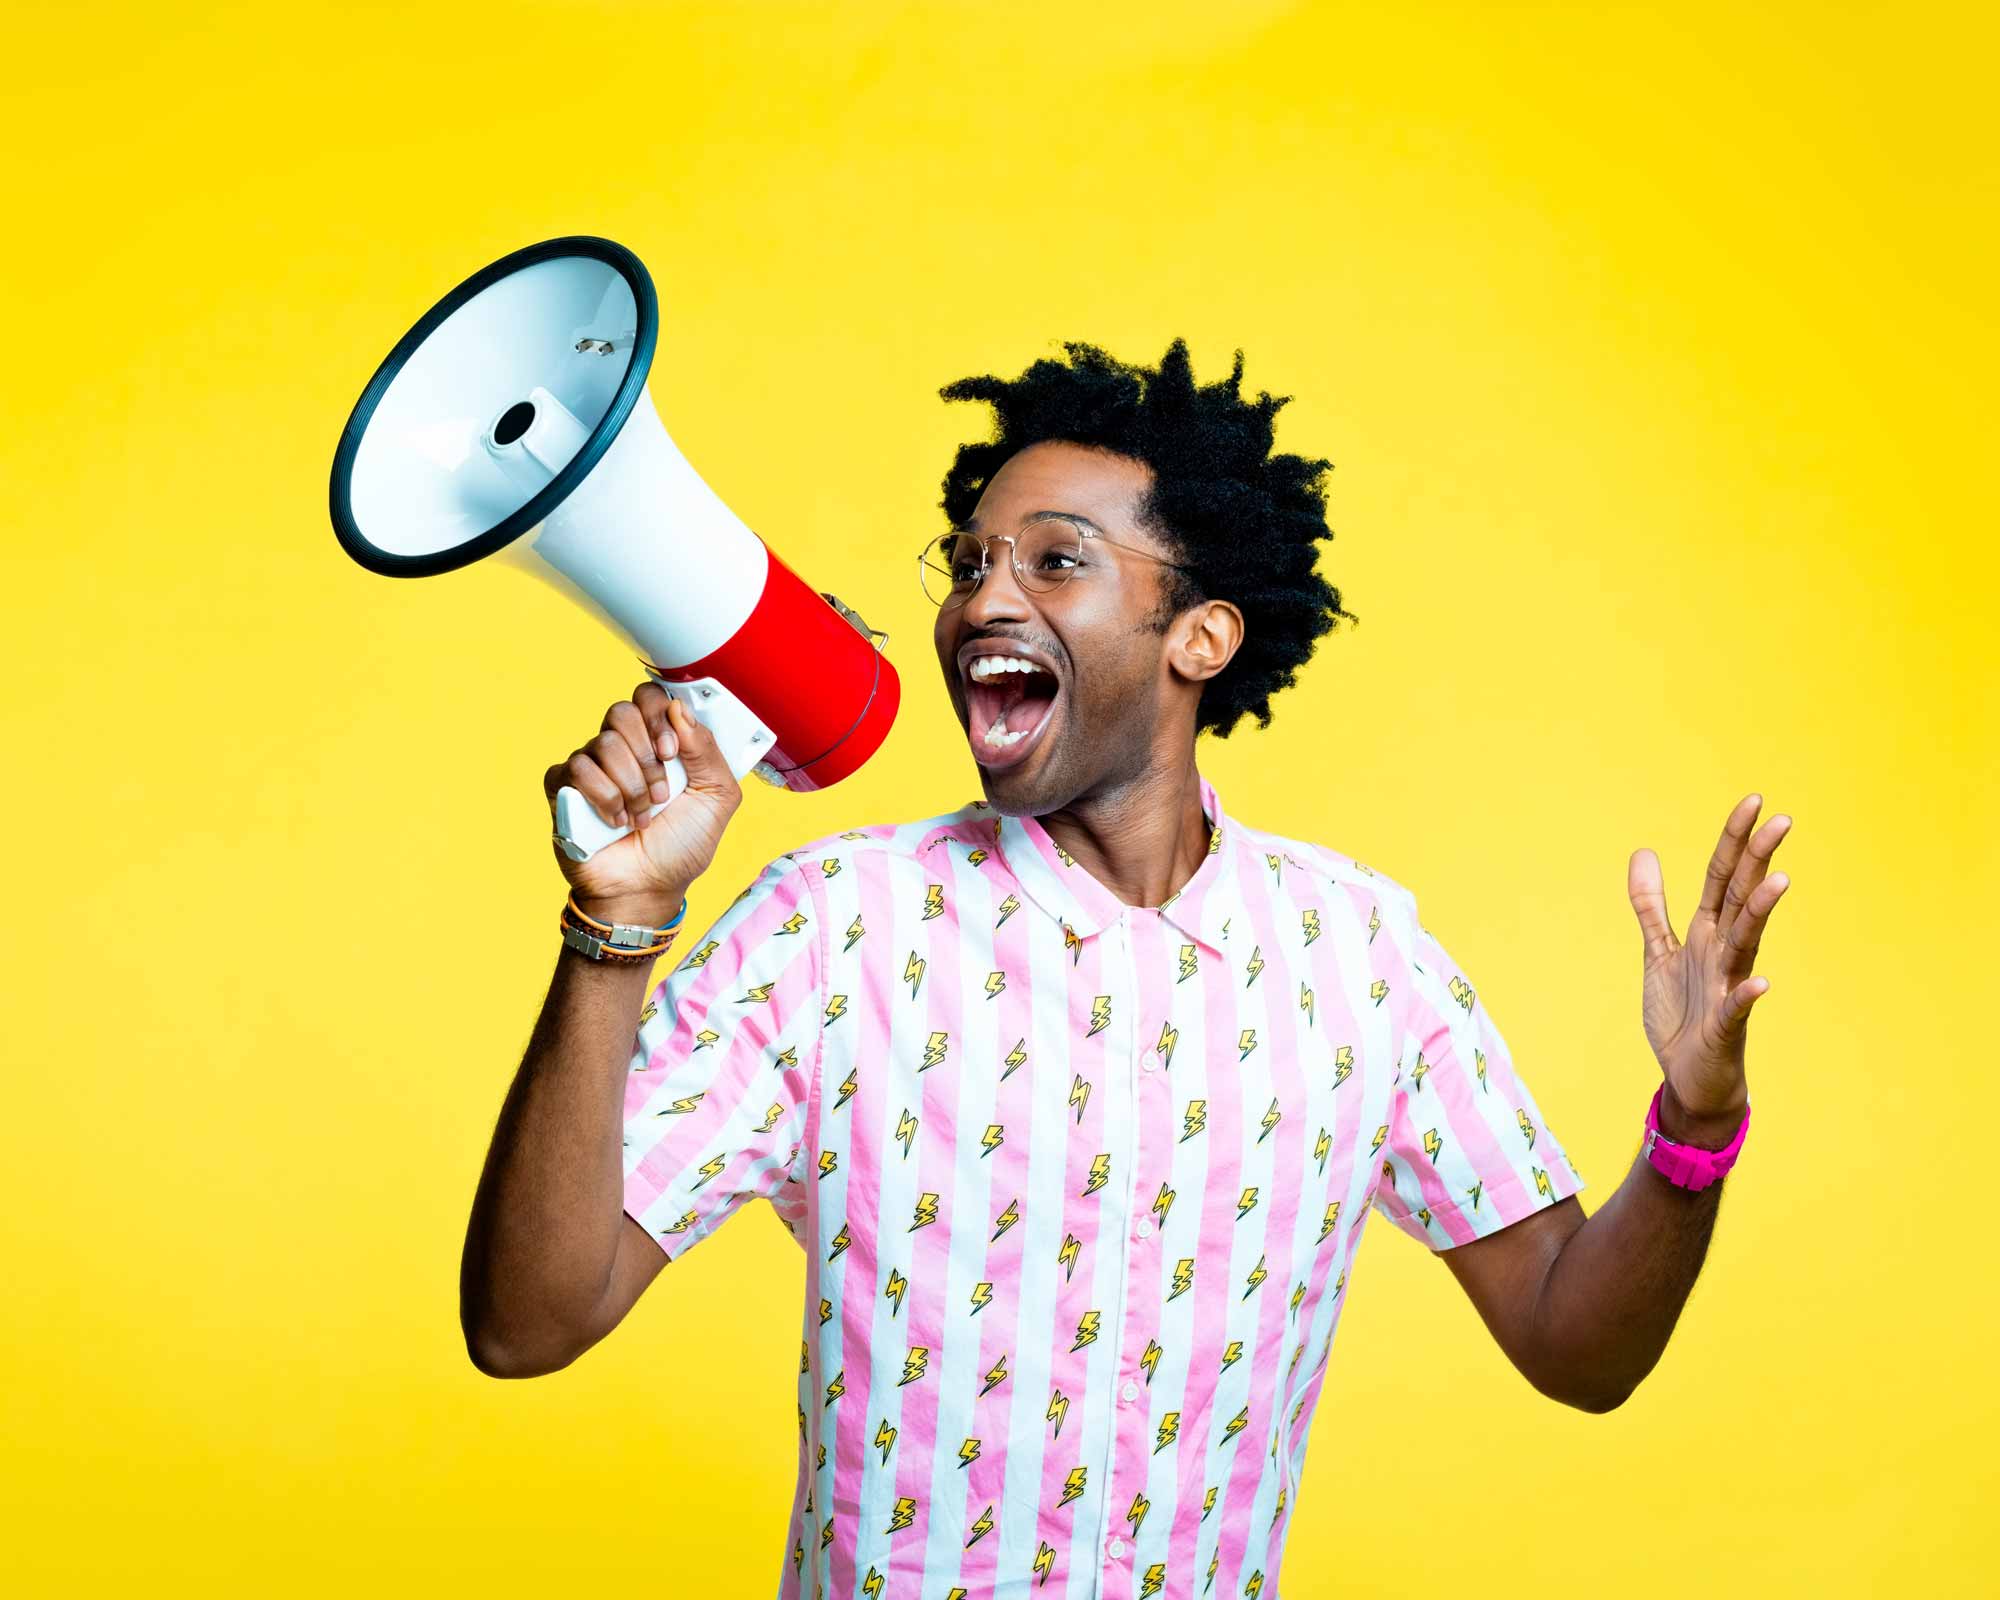 Man in a red patterned shirt smiling and speaking into a megaphone against a bright yellow background